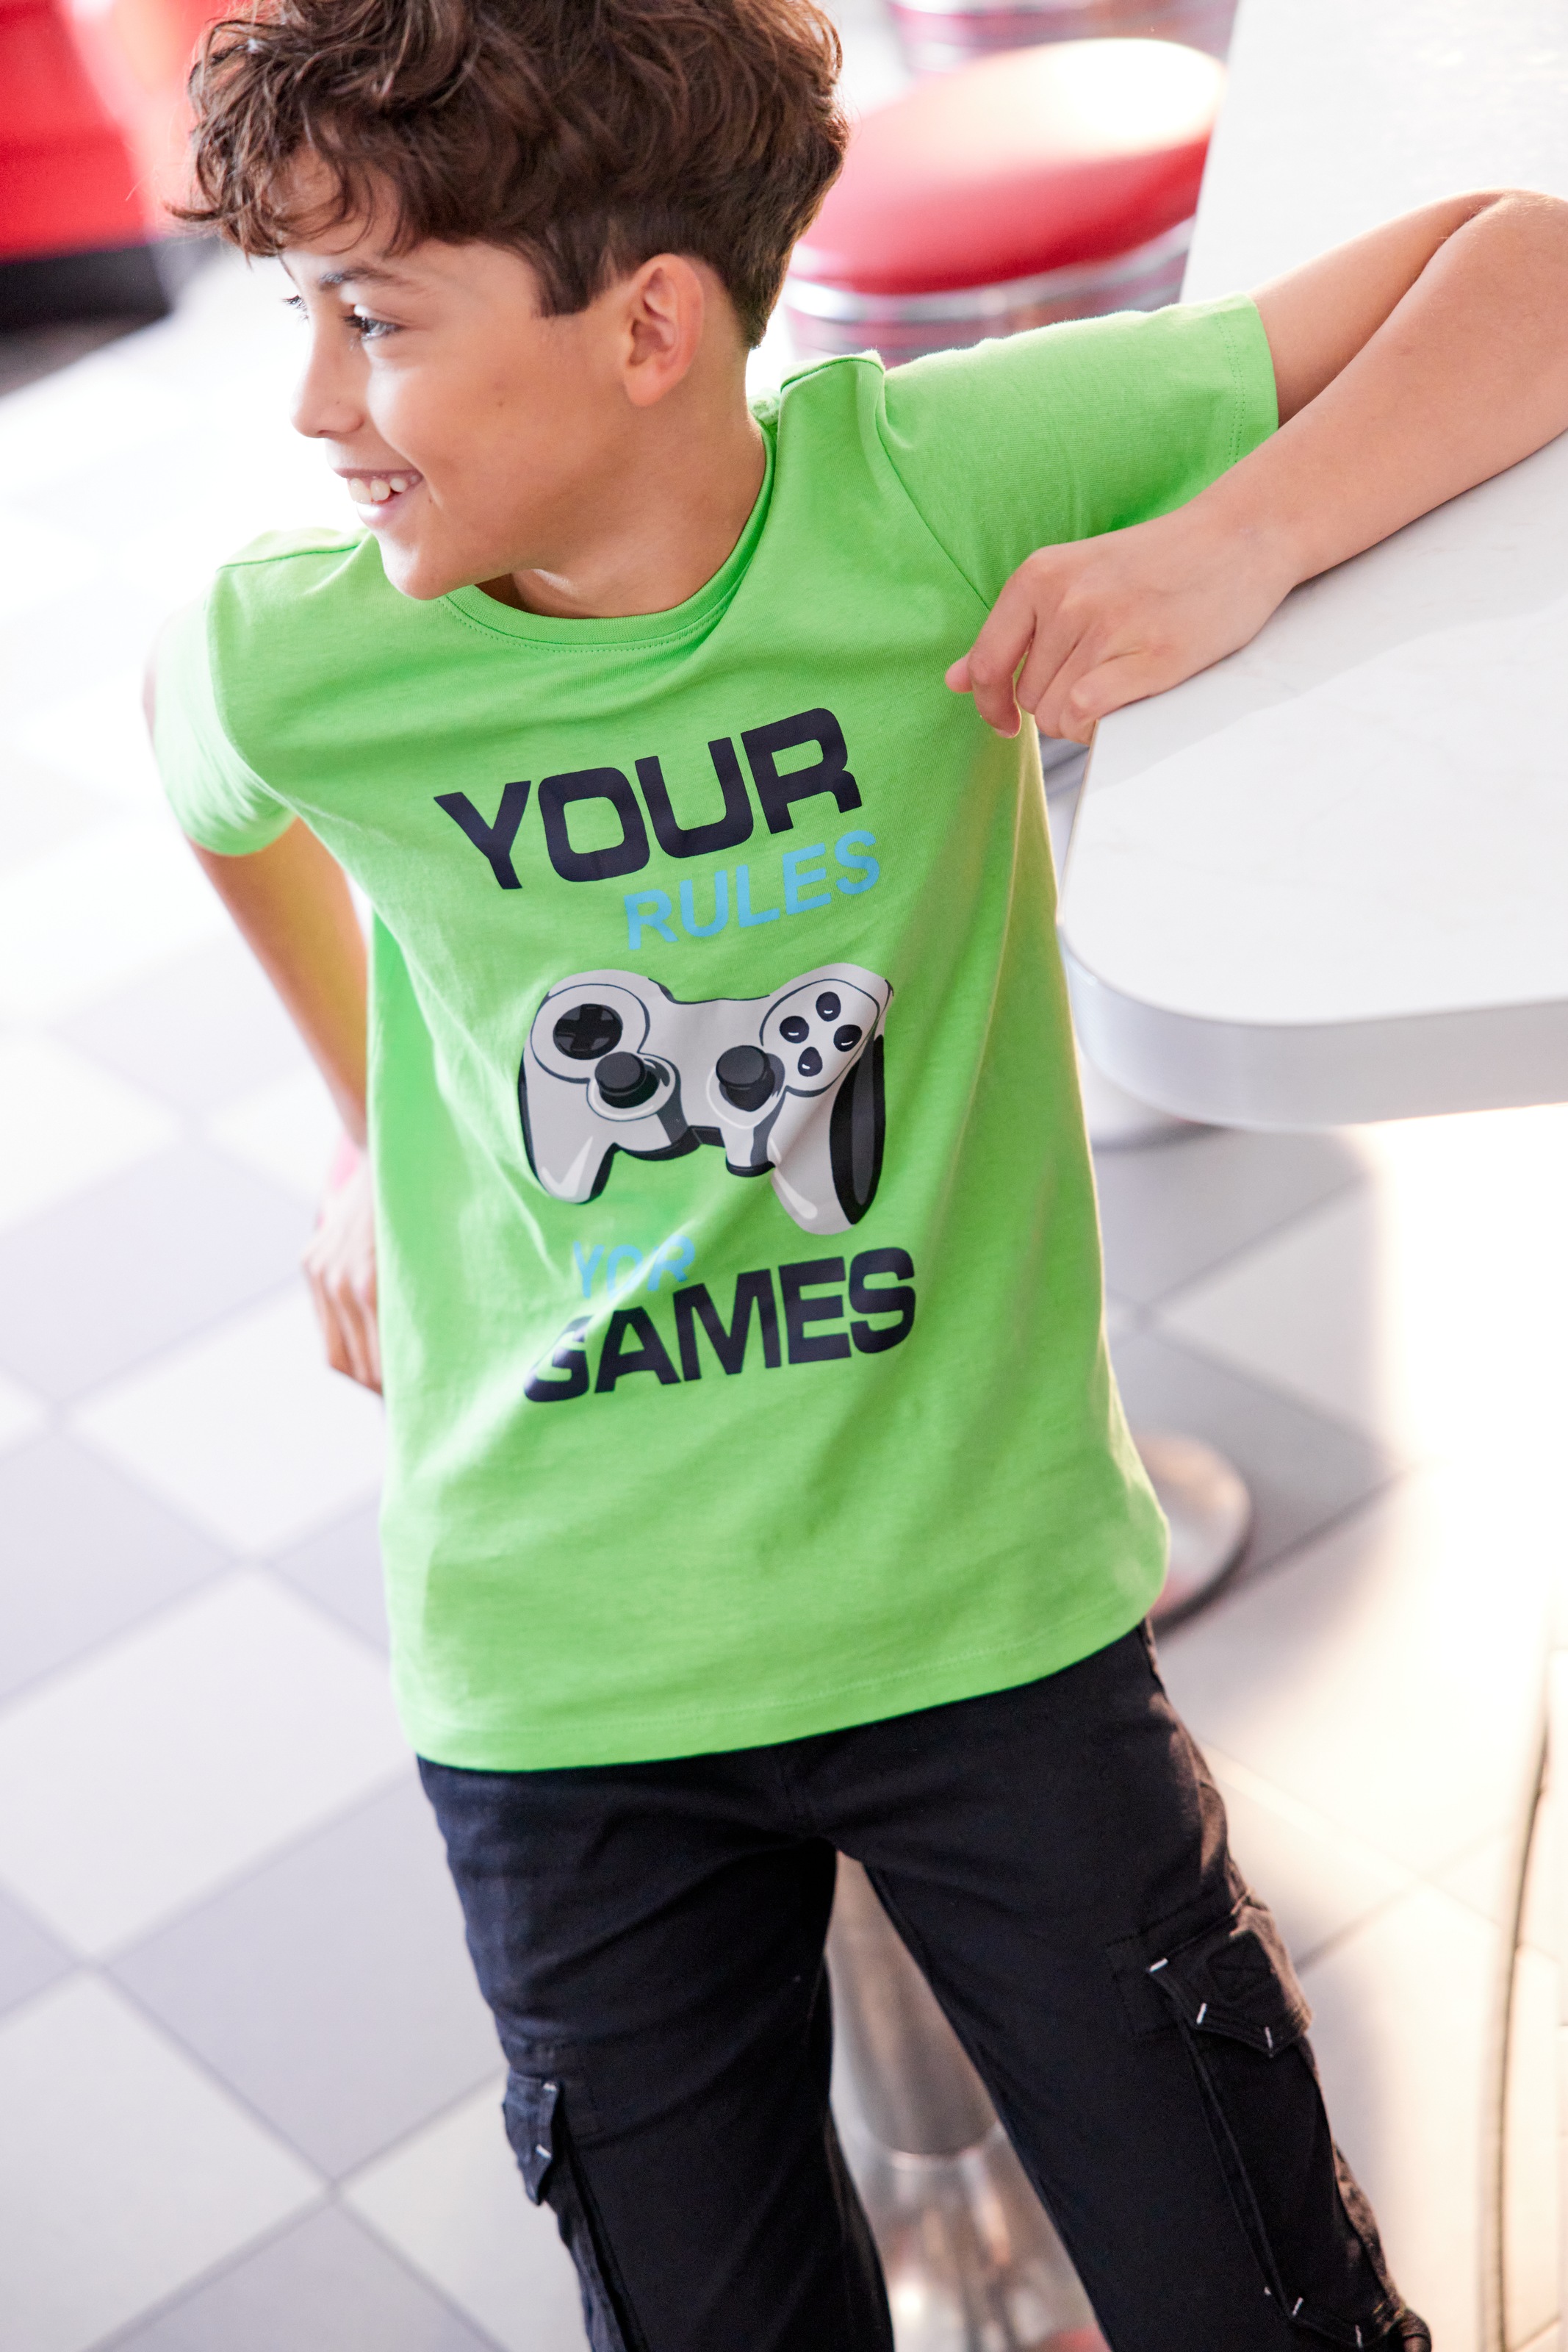 RULES »YOUR KIDSWORLD YOUR bei T-Shirt GAMES«